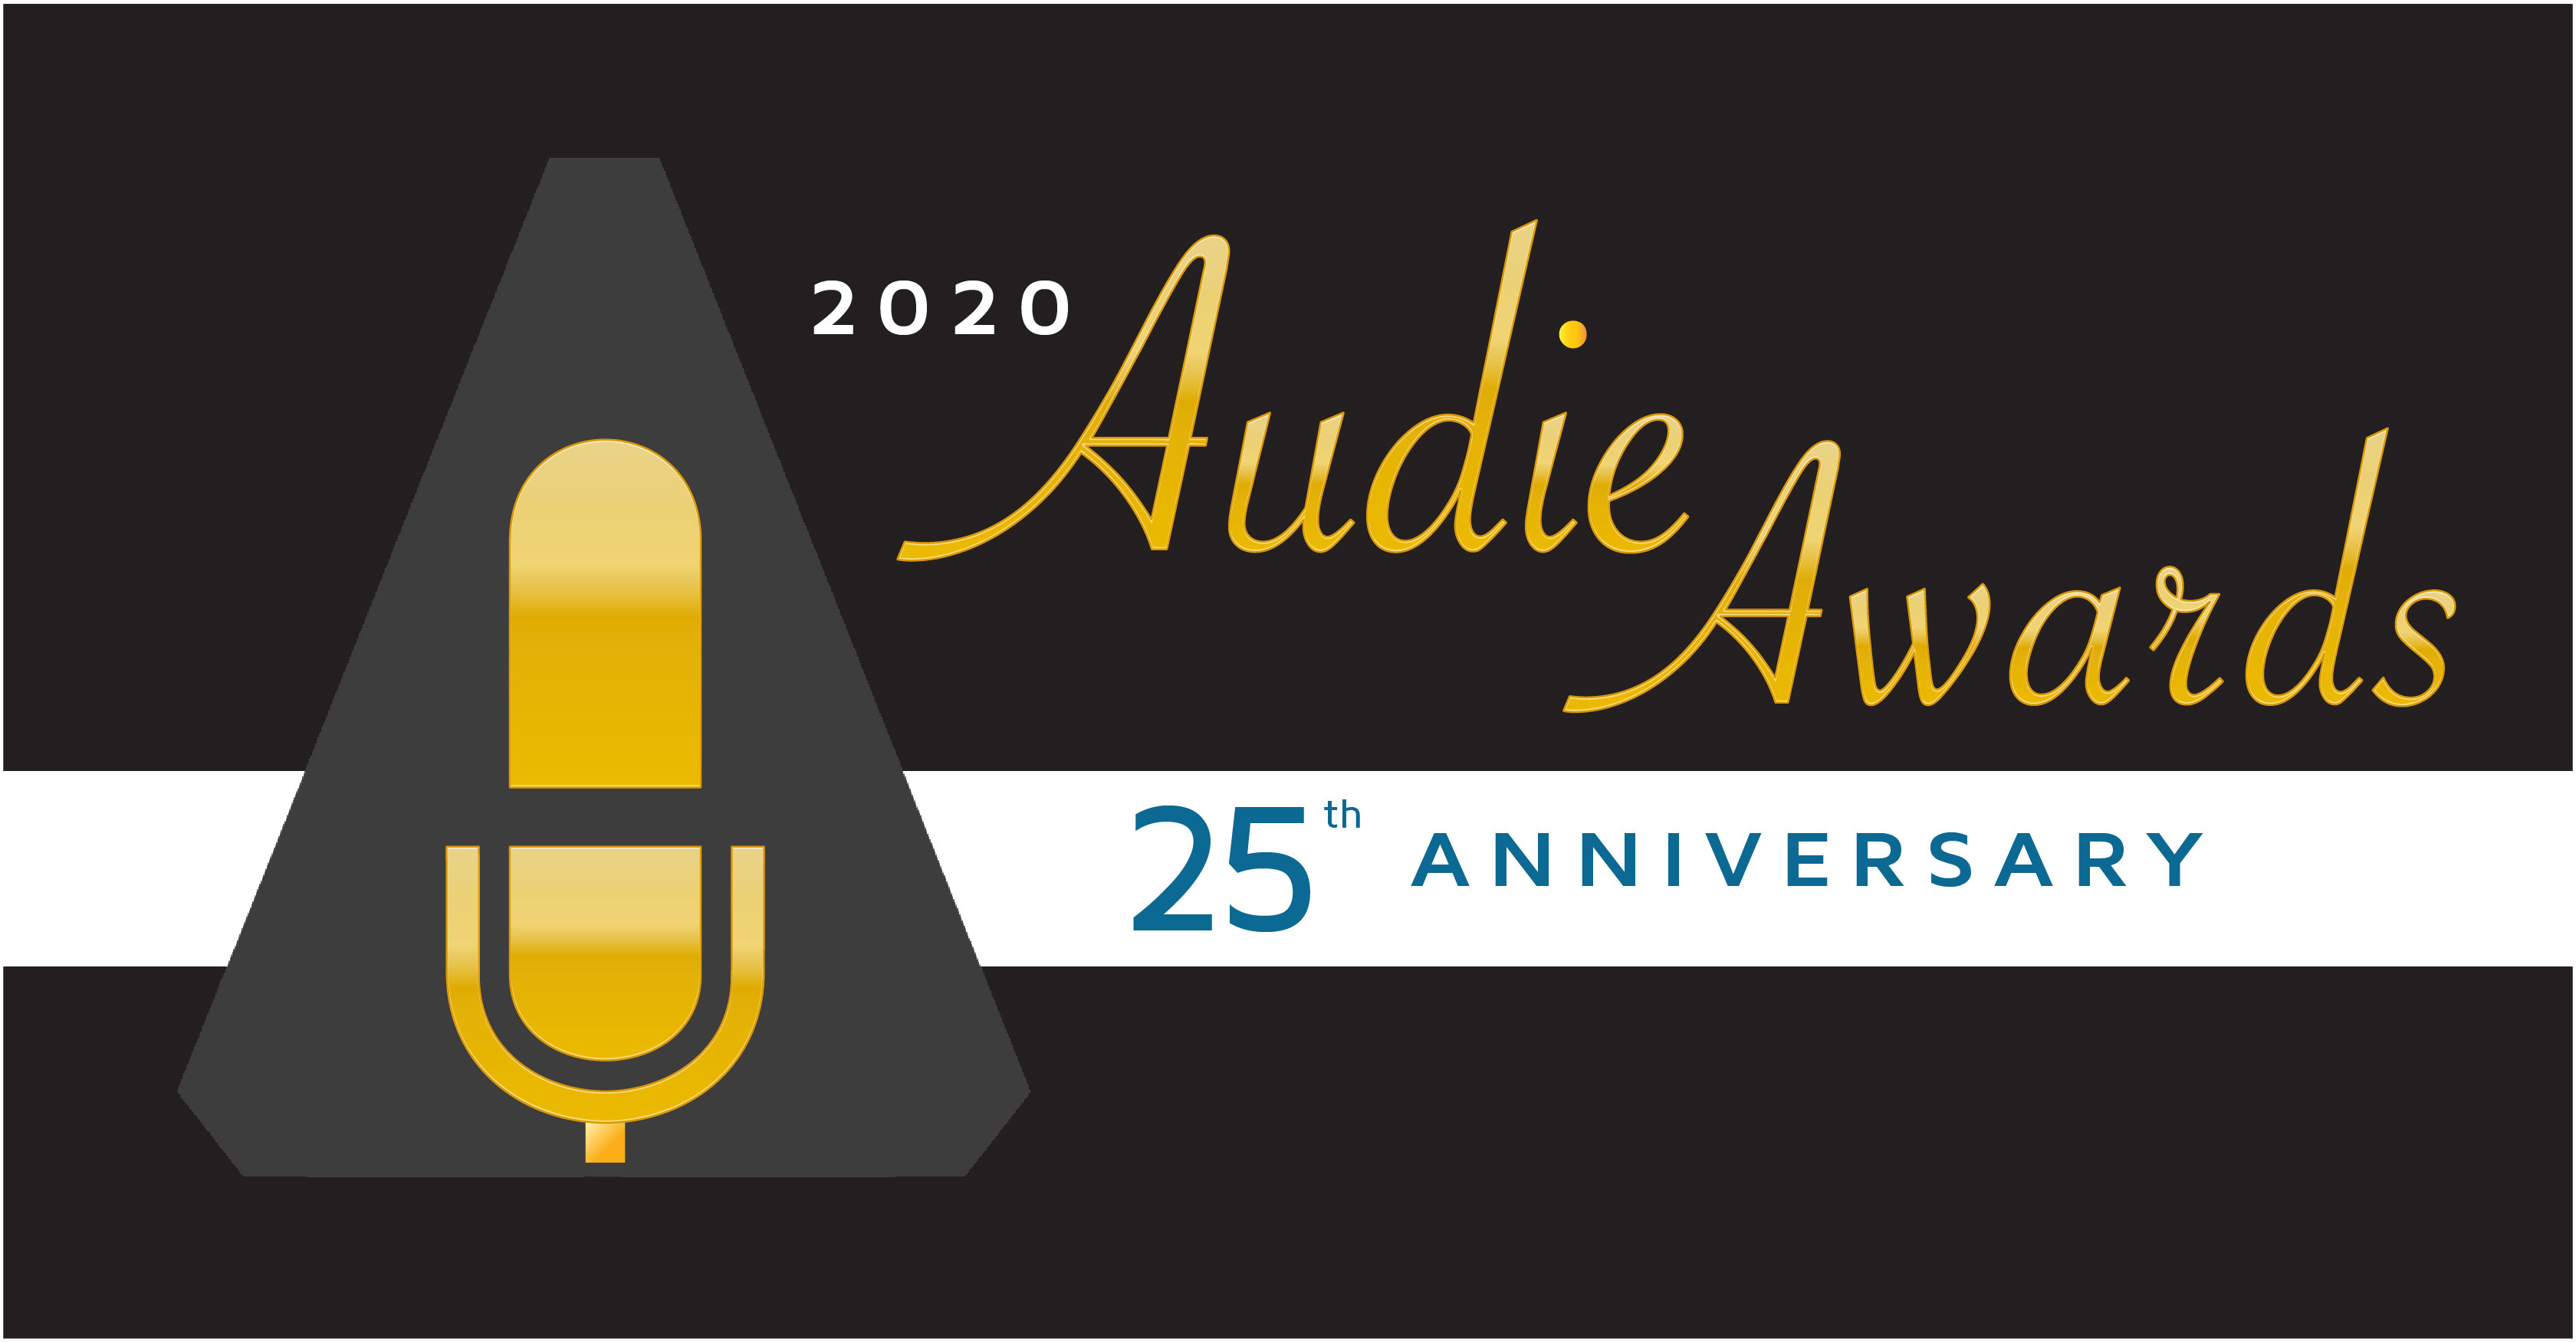 2020 Audie Awards to Honor Stephen King for Lifetime Achievement